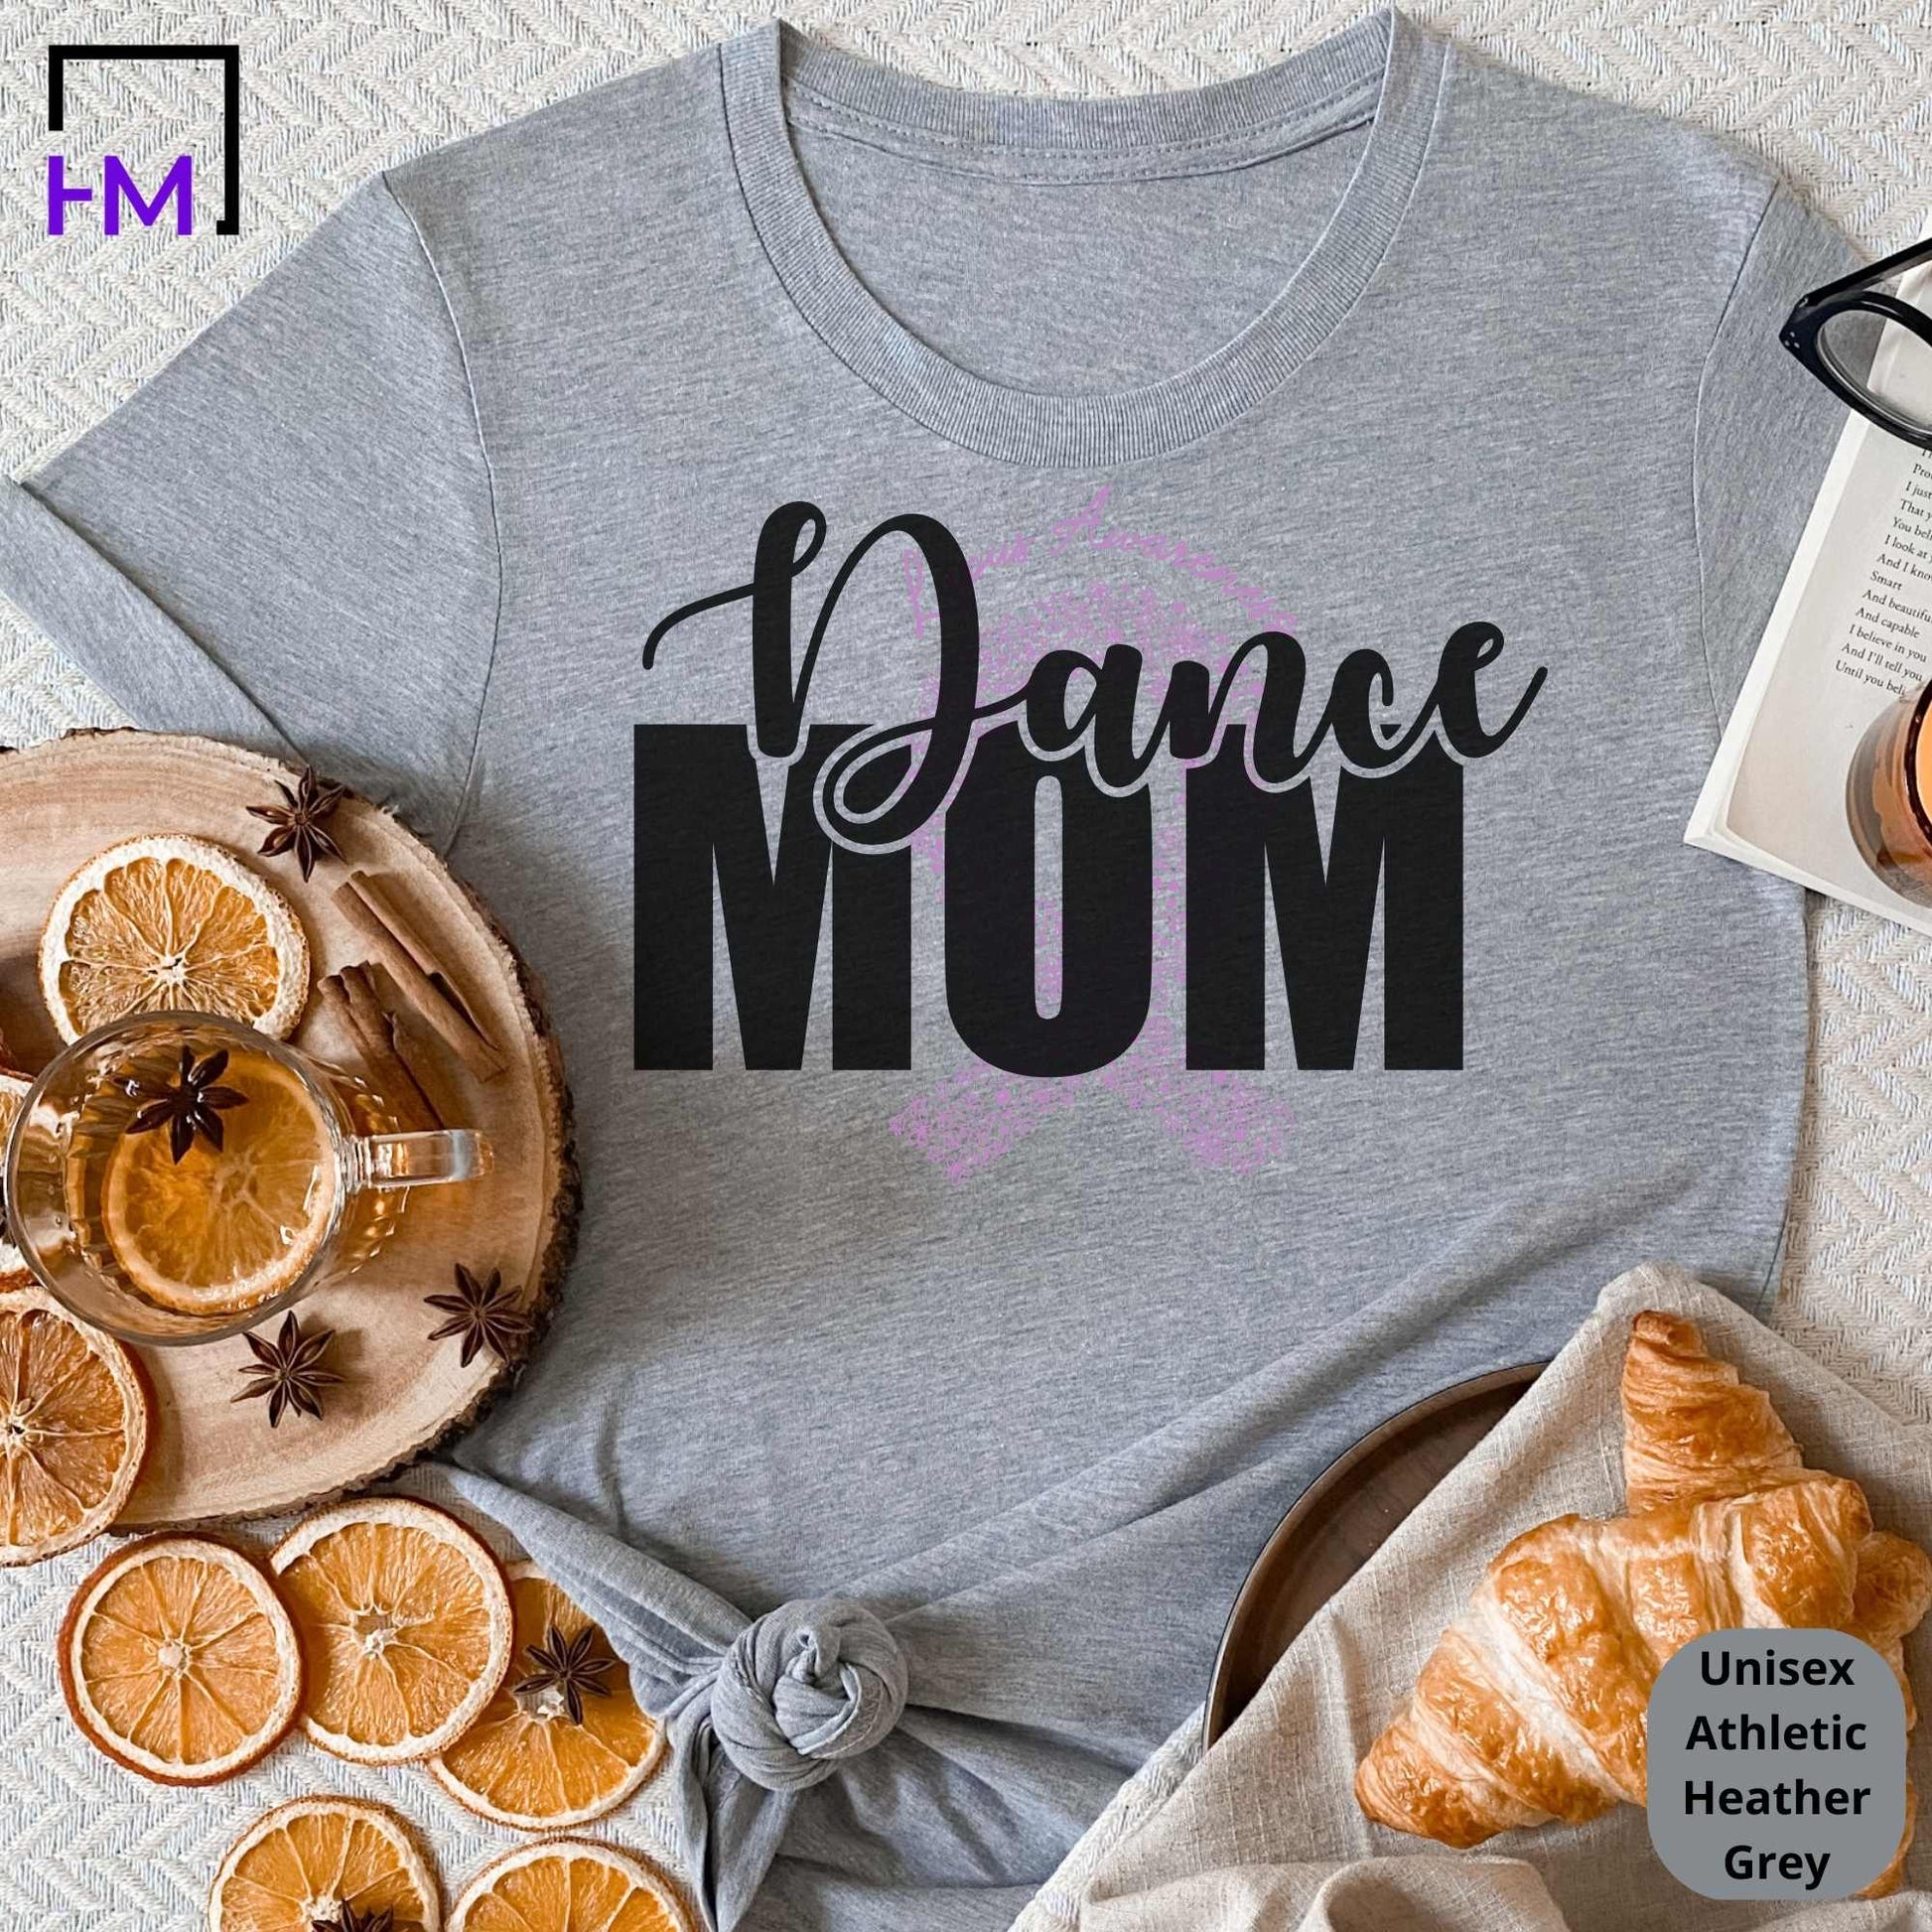 Dance Mom Tshirt | The Perfect Gift for Passionate Dance Moms HMDesignStudioUS